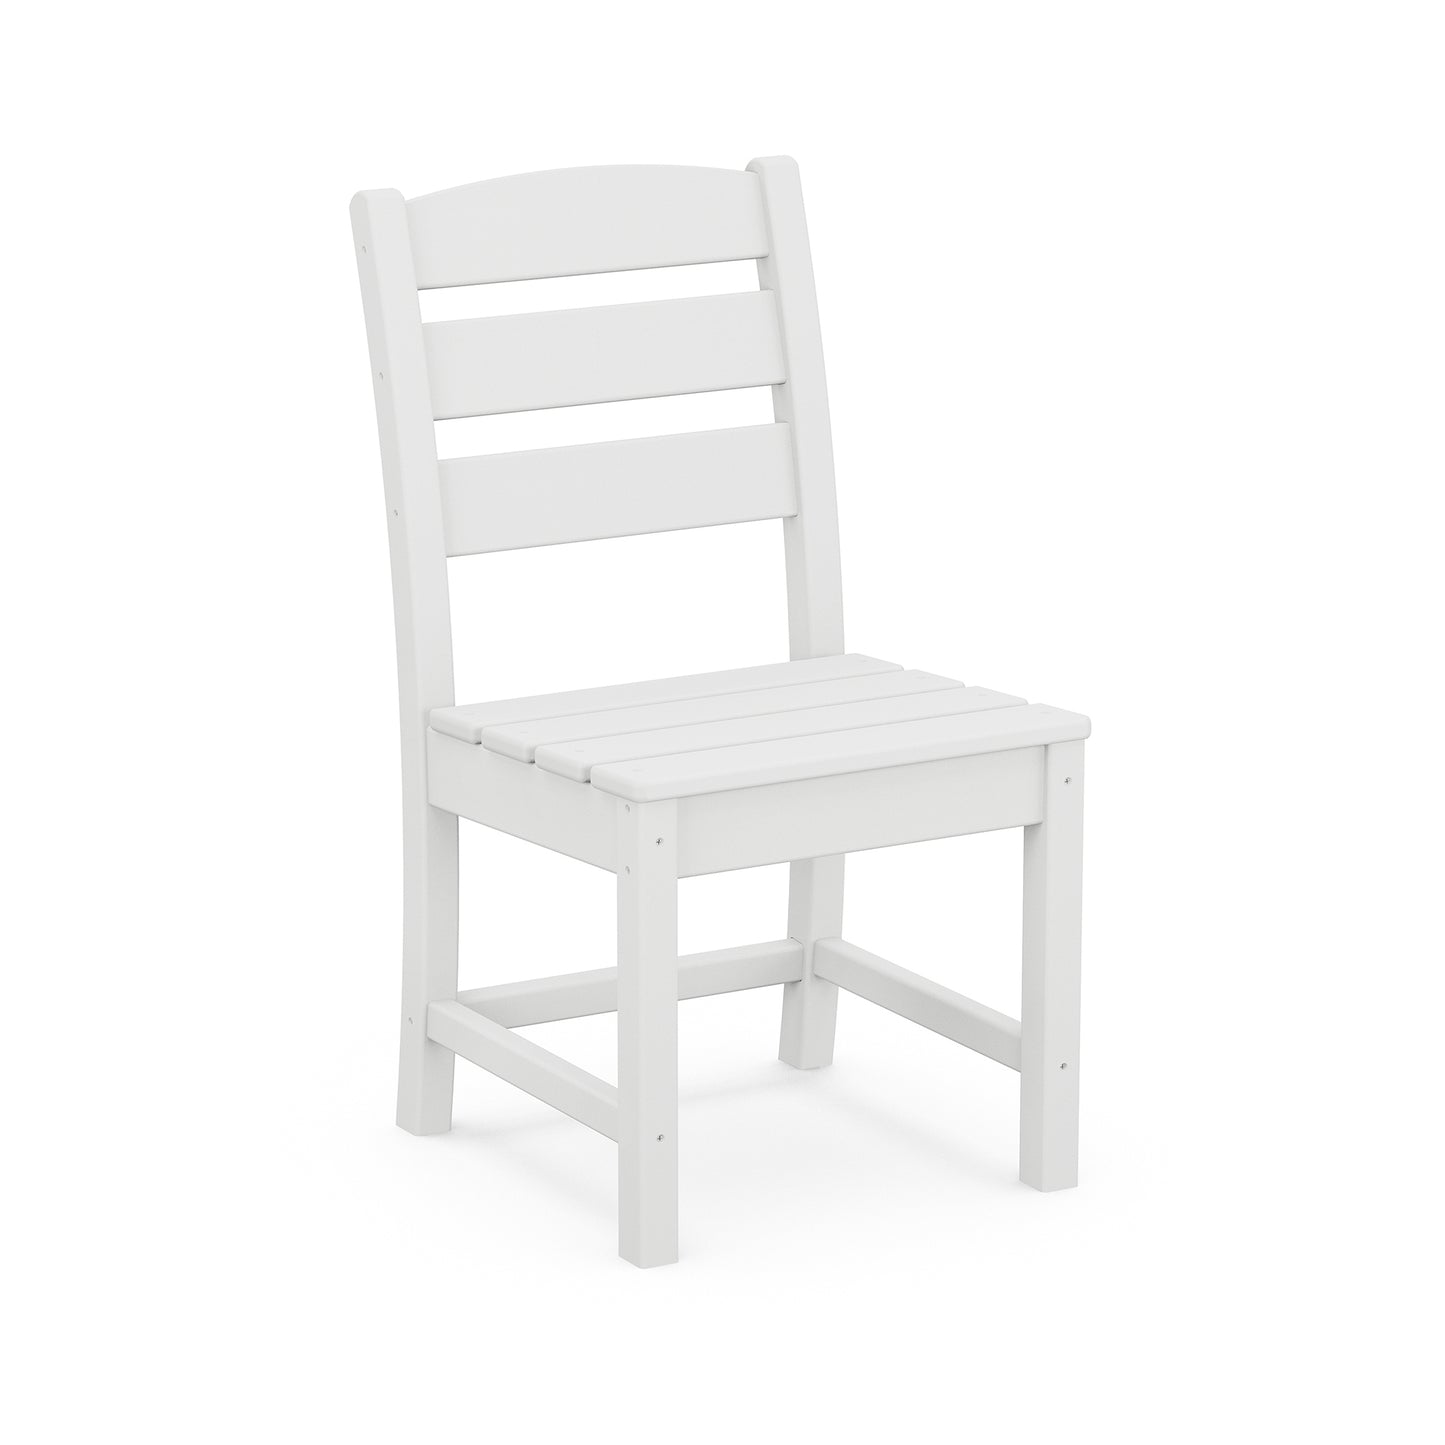 A POLYWOOD® Lakeside Dining Side Chair with a straight back and three horizontal slats, standing on a plain white background.